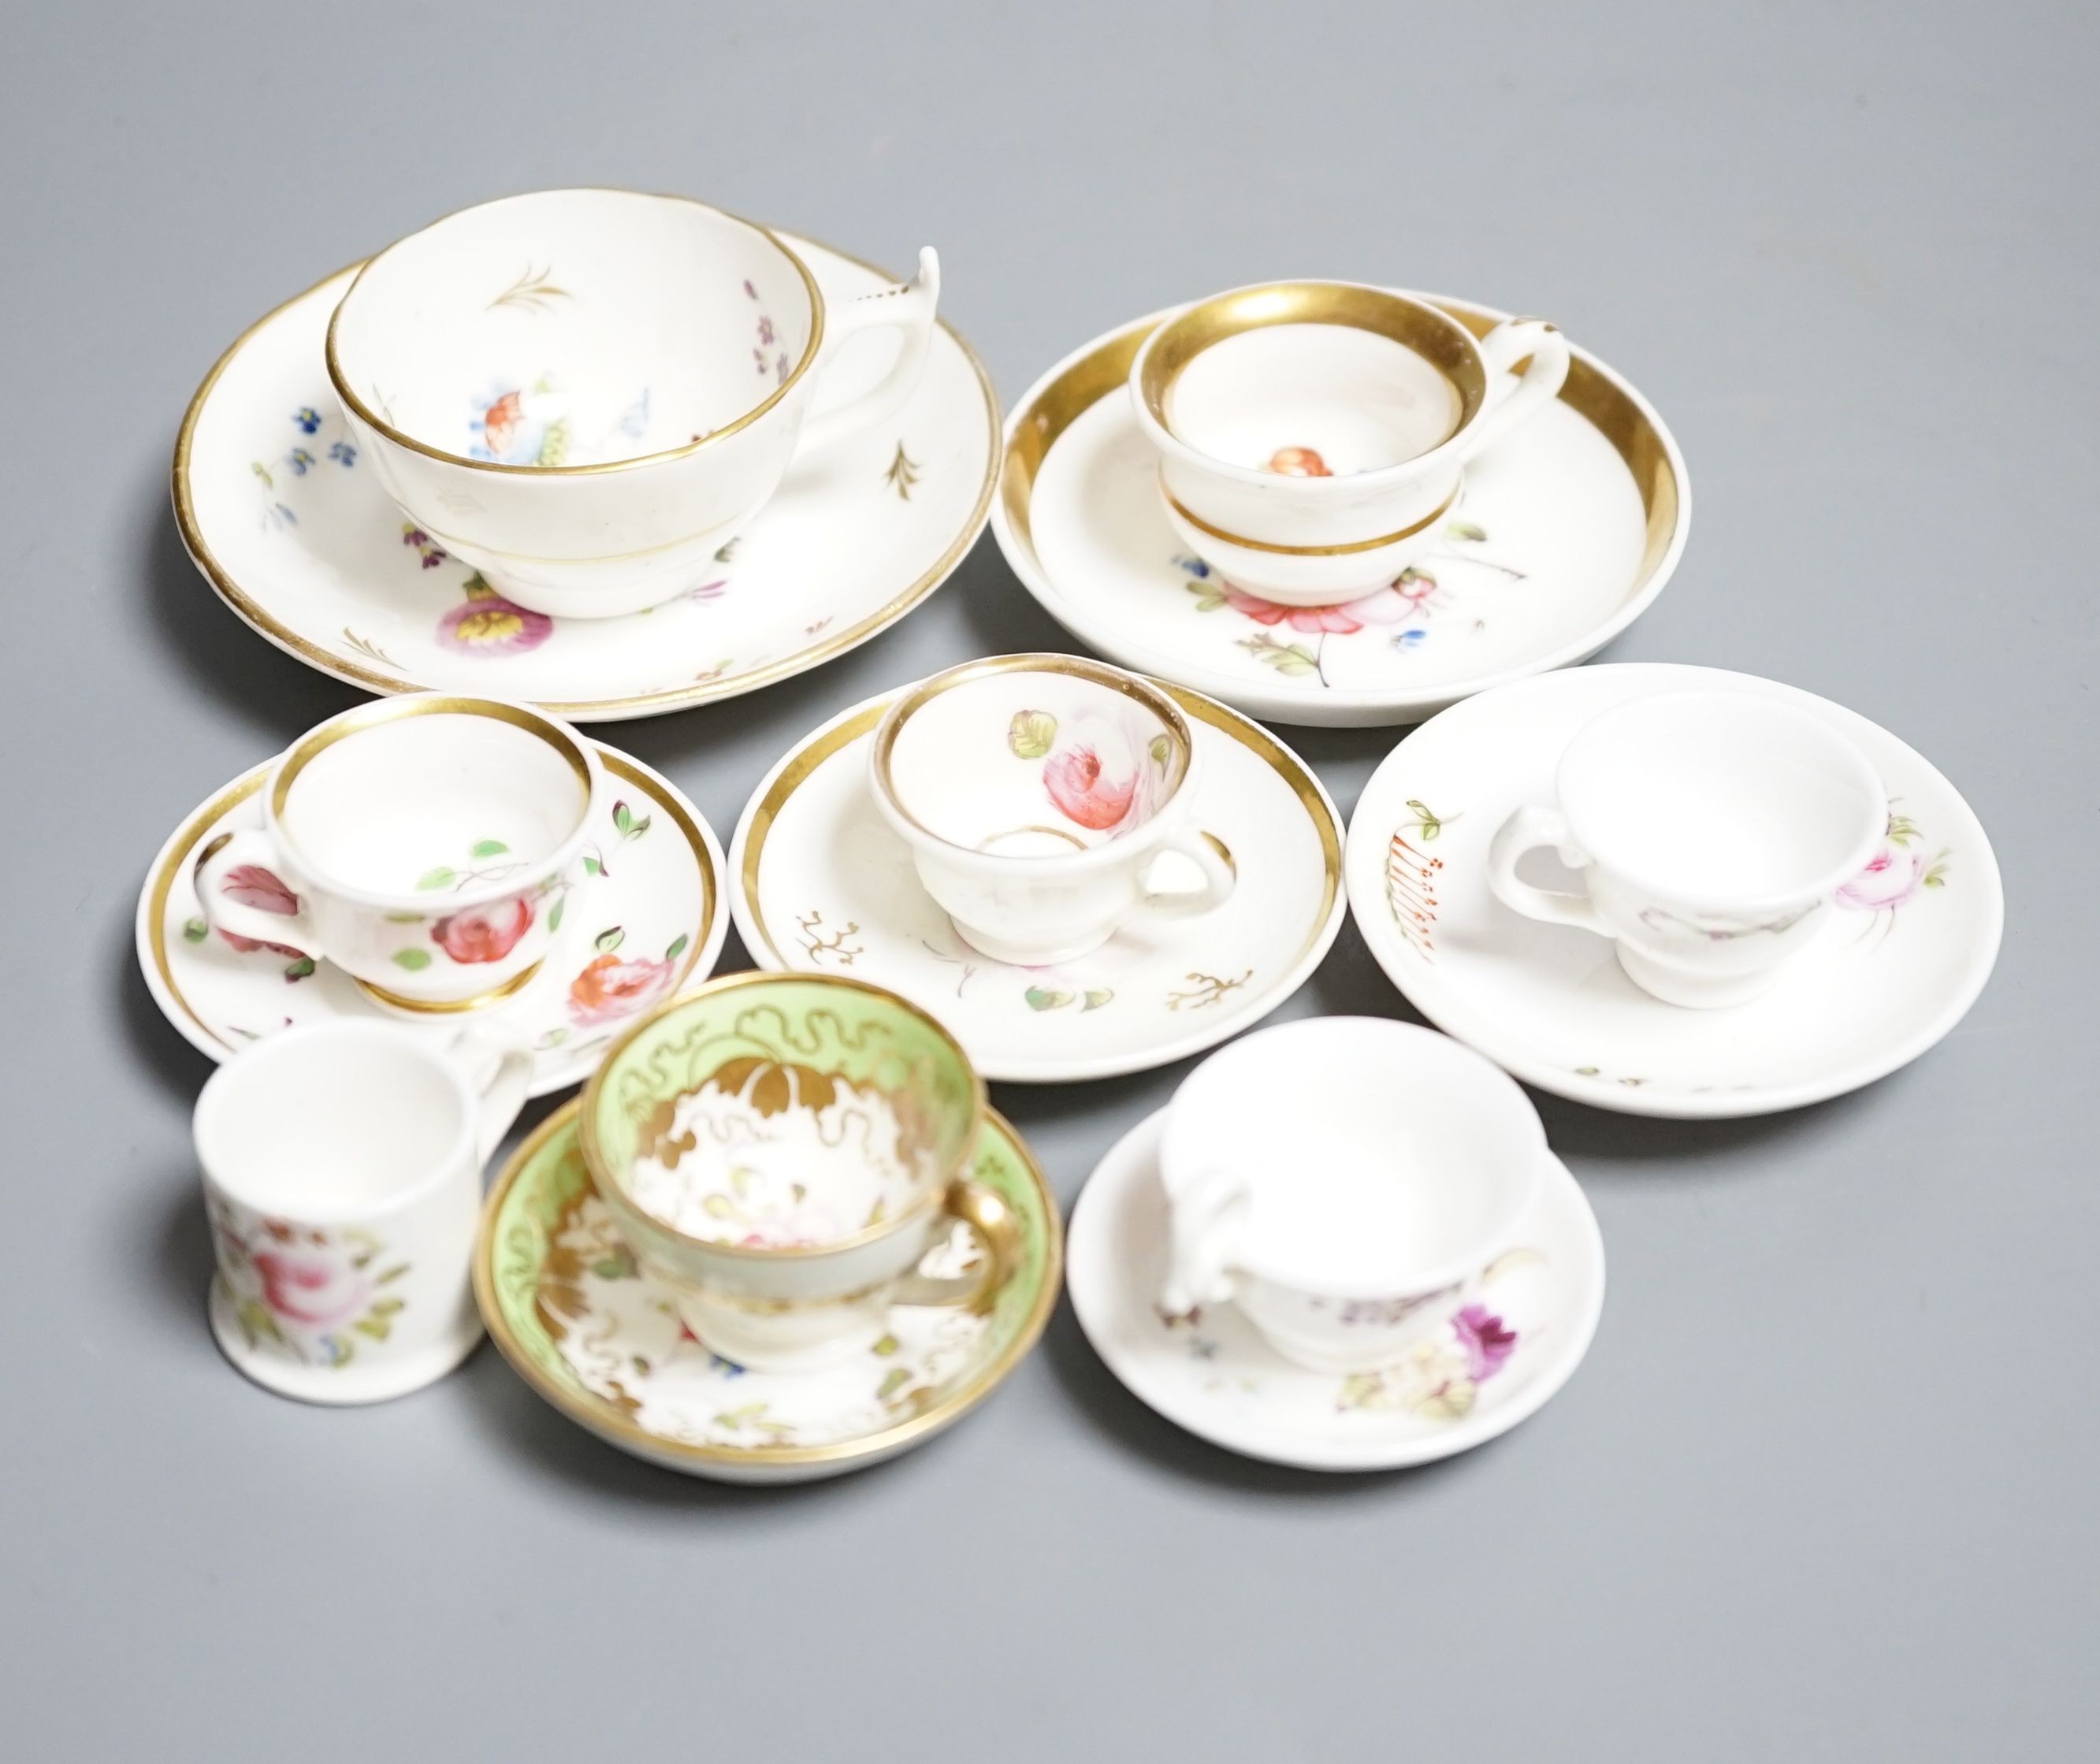 Seven Staffordshire or Alcock miniature teacups and saucers and a similar miniature mug, c.1815-20. Provenance - Mona Sattin collection of miniature cups and saucers, collection no.s 144, 148, 151, 152, 155, 161-163